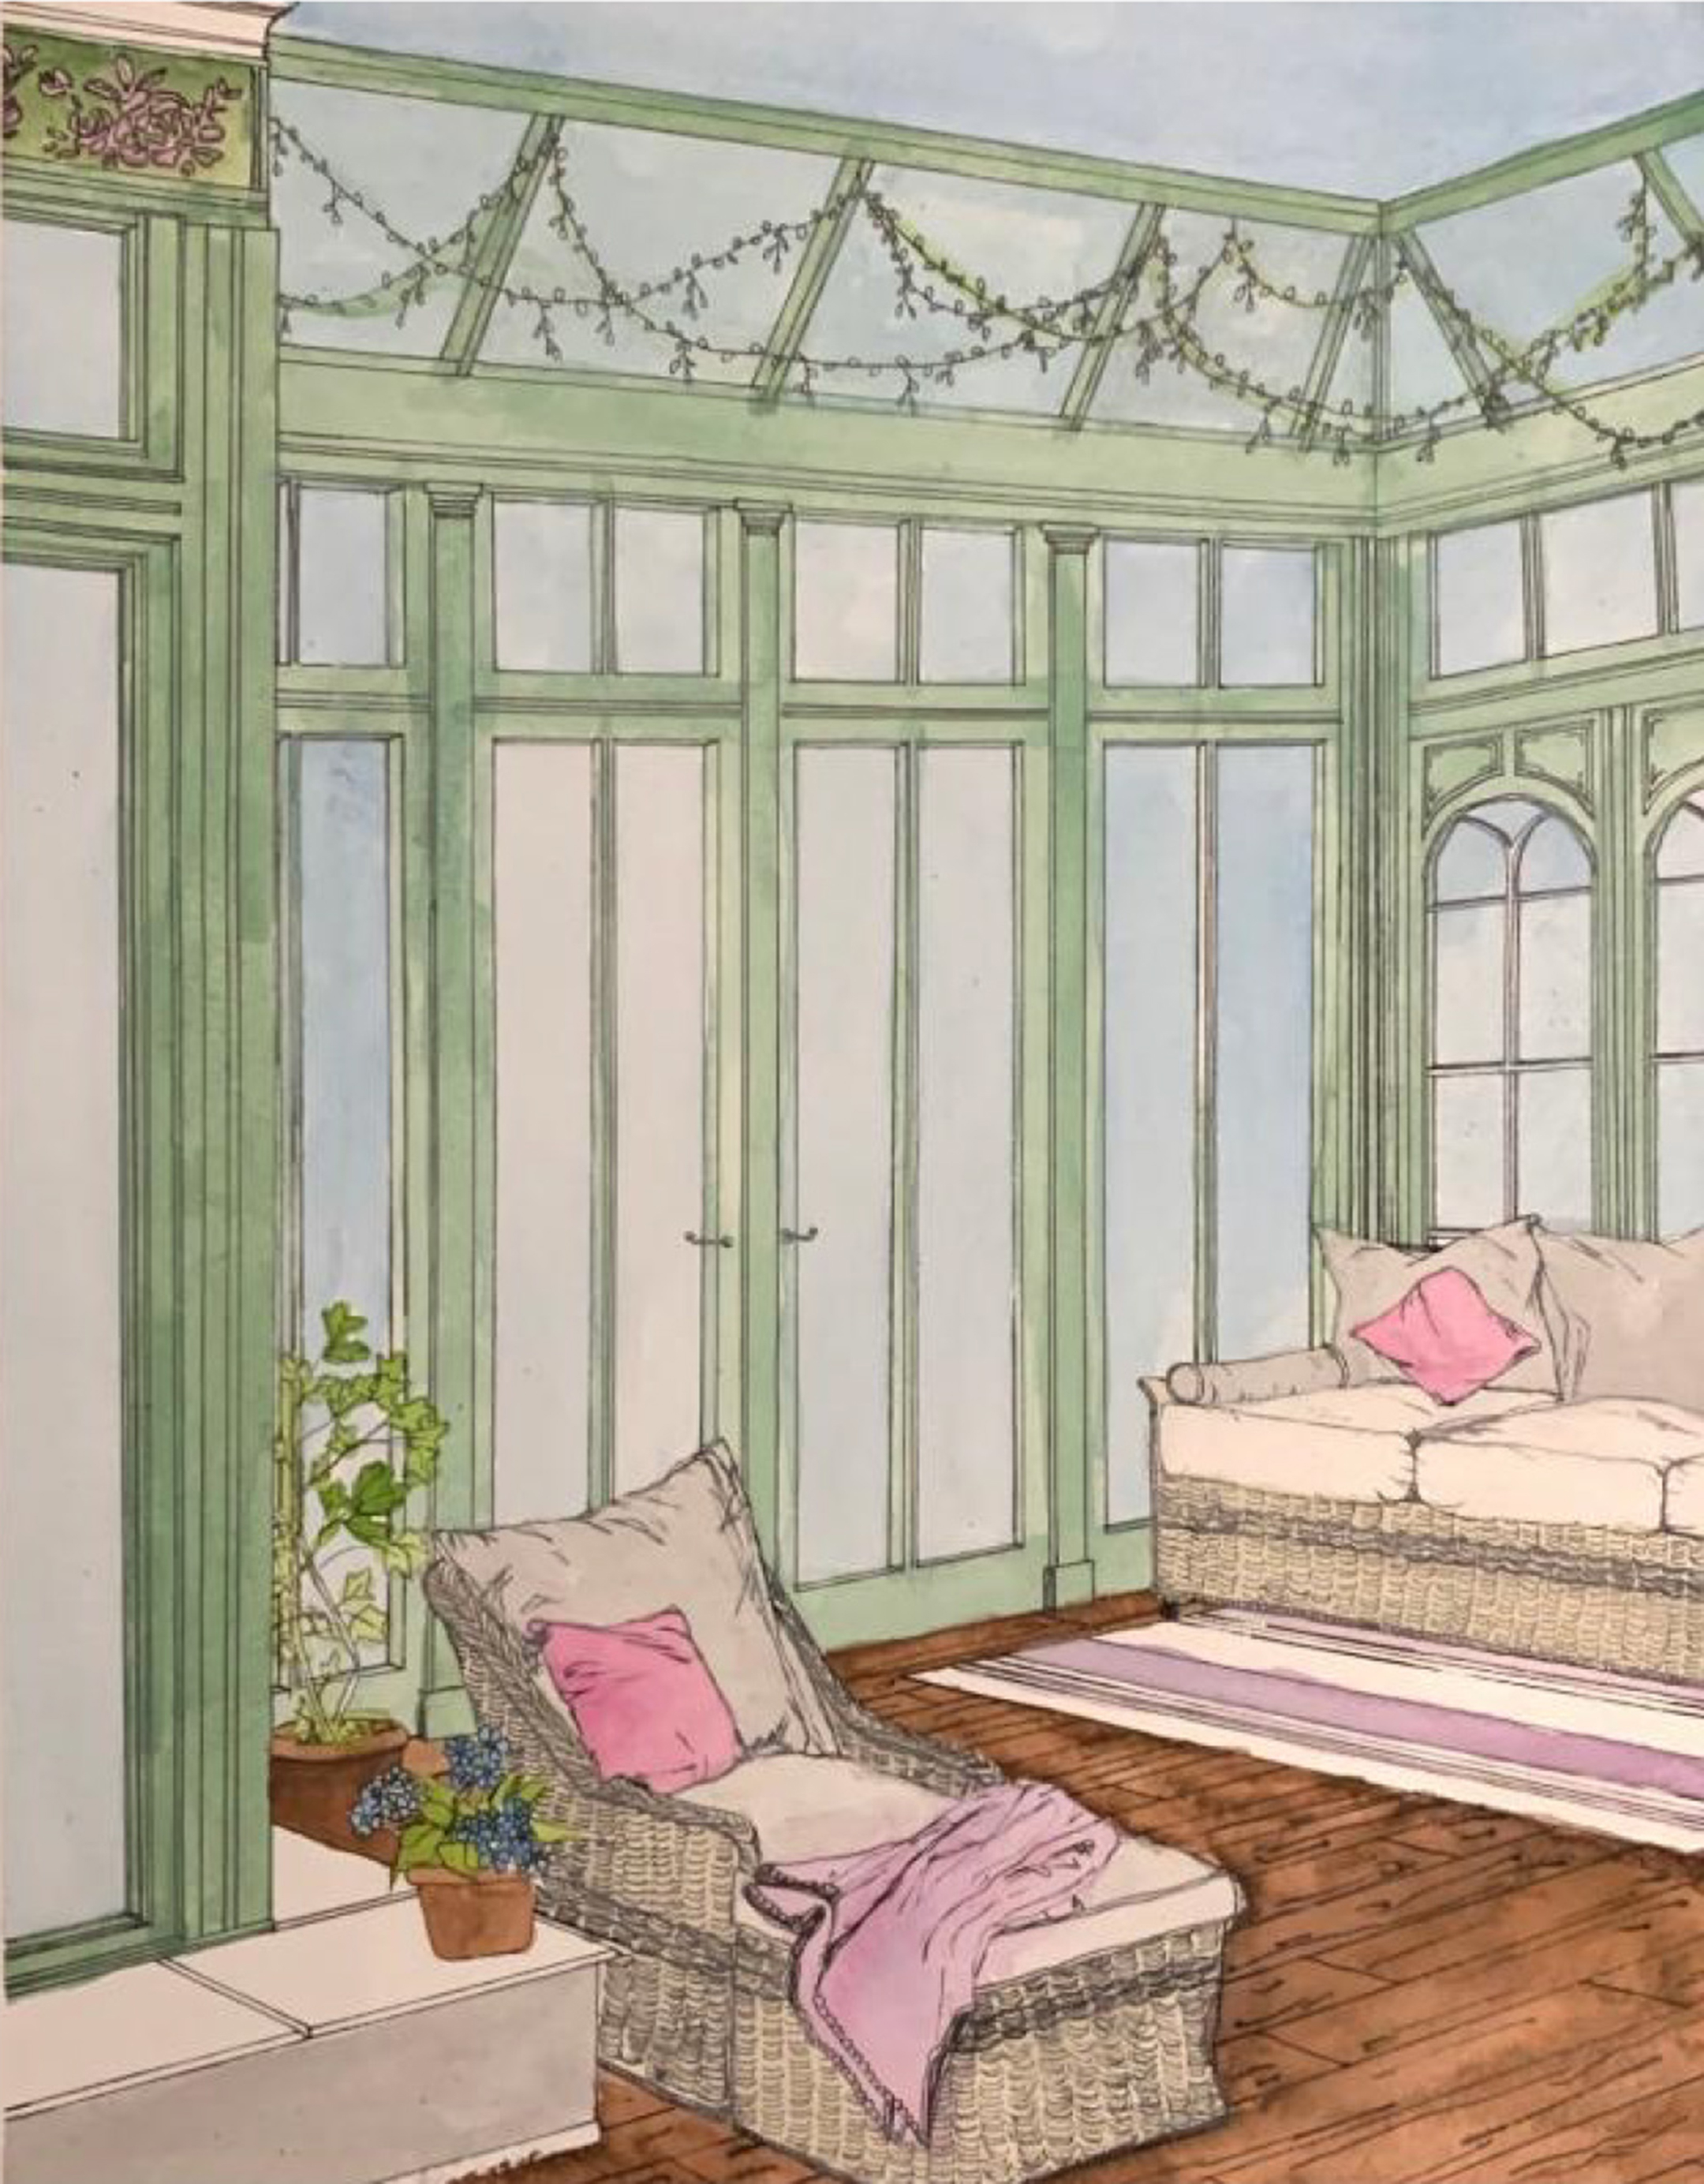 Illustration of a room with white furniture, pink pillows, and light blue walls with green trim